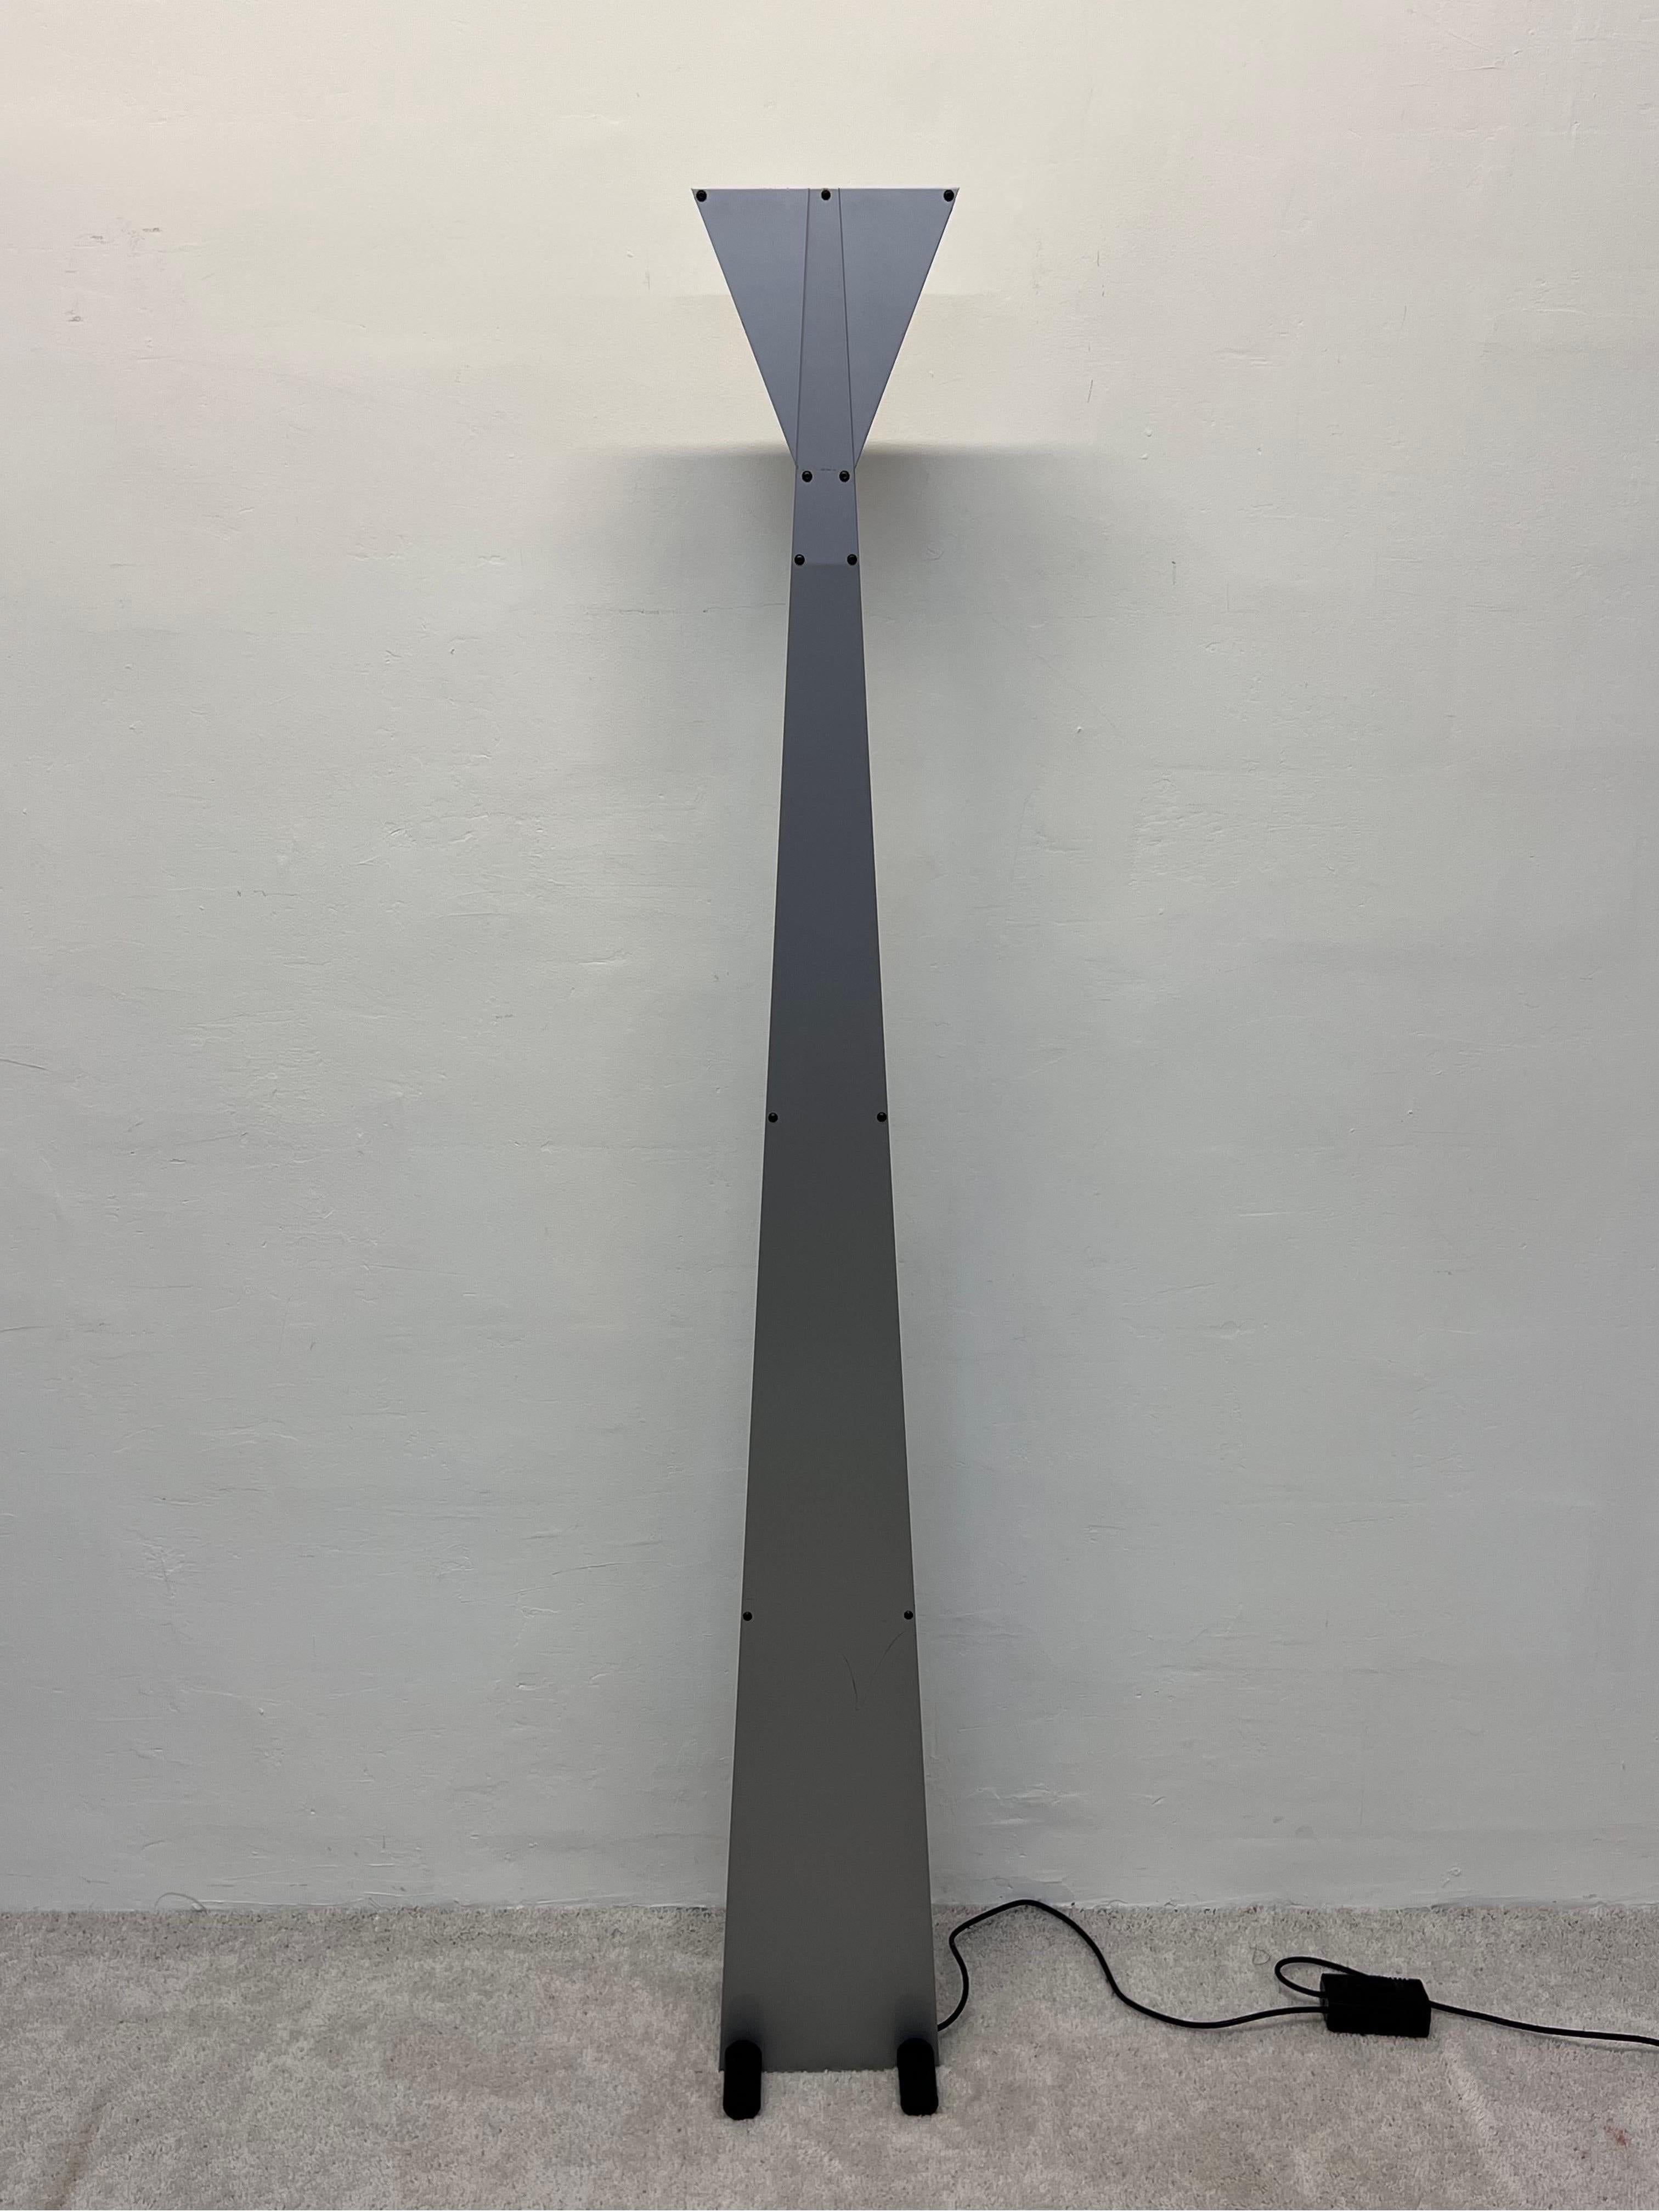 Postmodern 1980s torchiere floor lamp with black steel base, gray steel support and blue glass side diffusers. The in-line foot control allows for dimming of the halogen bulb.